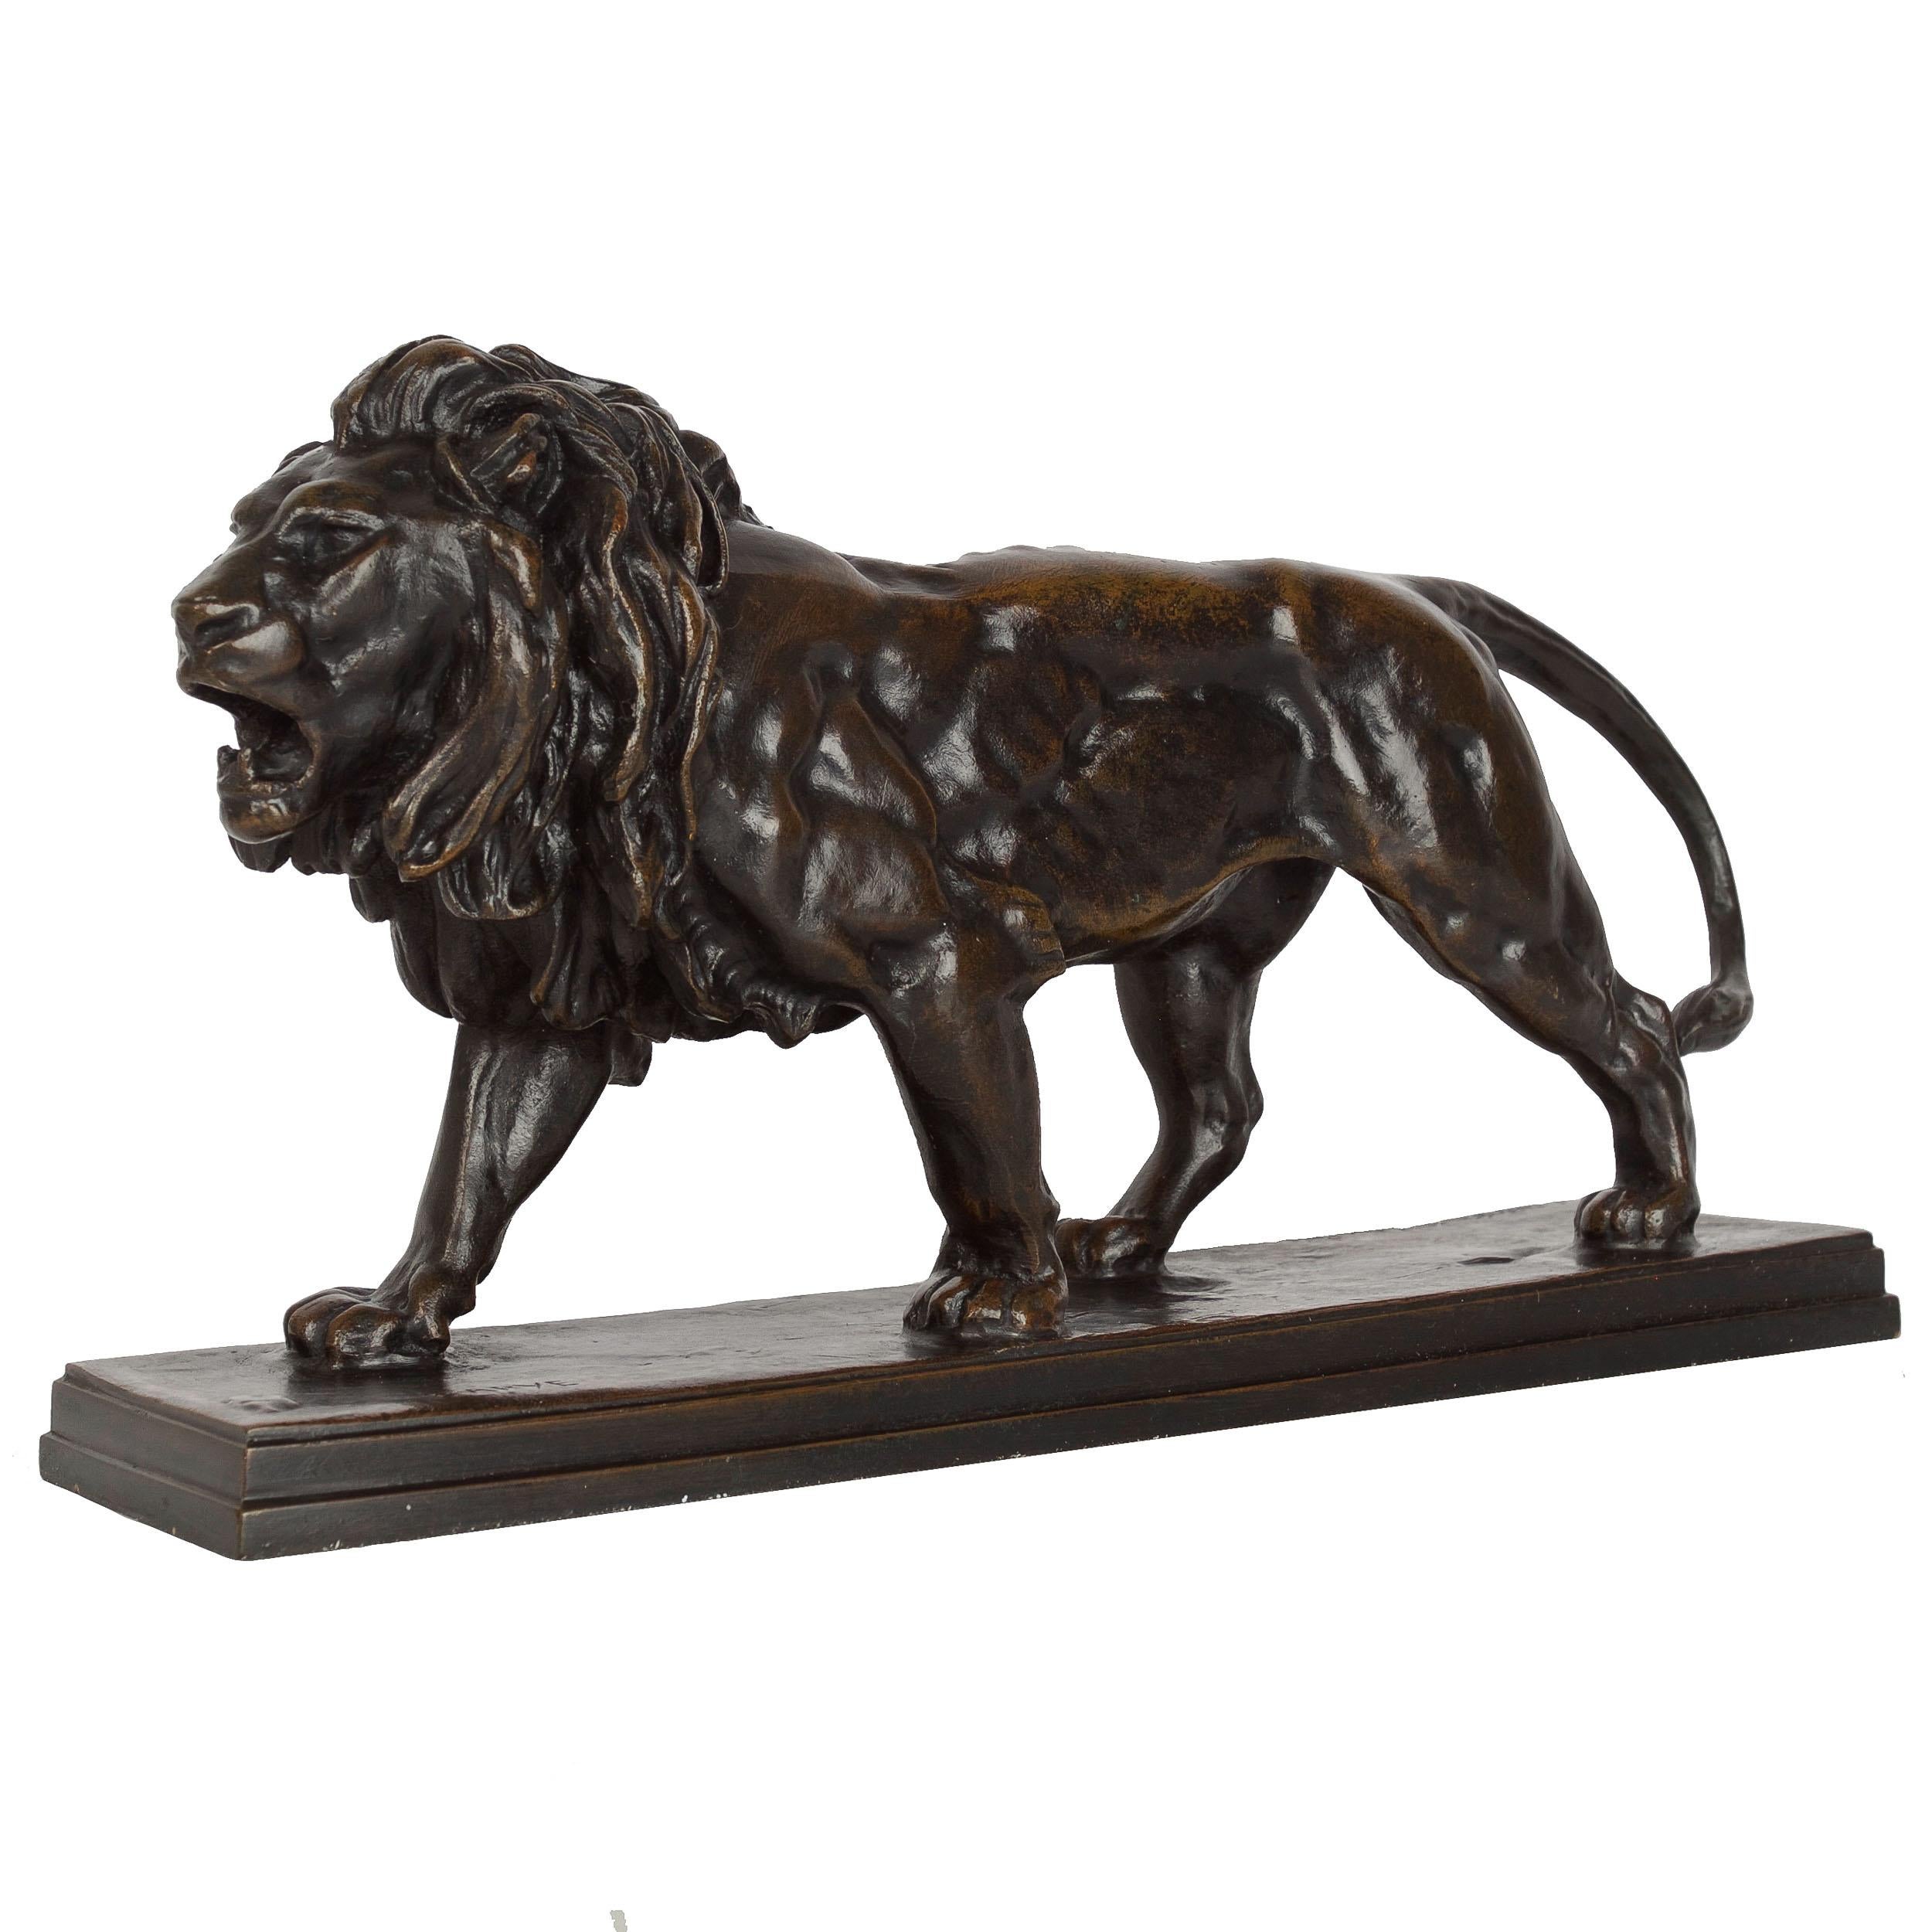 Originally conceived in 1840, Lion Qui Marche was modeled by Barye as a development from his similar bas-relief plaque of Roaring Lion and nearly identical Lion of the Zodiac. Influence for the model is perhaps somewhat owed to Visconti's 